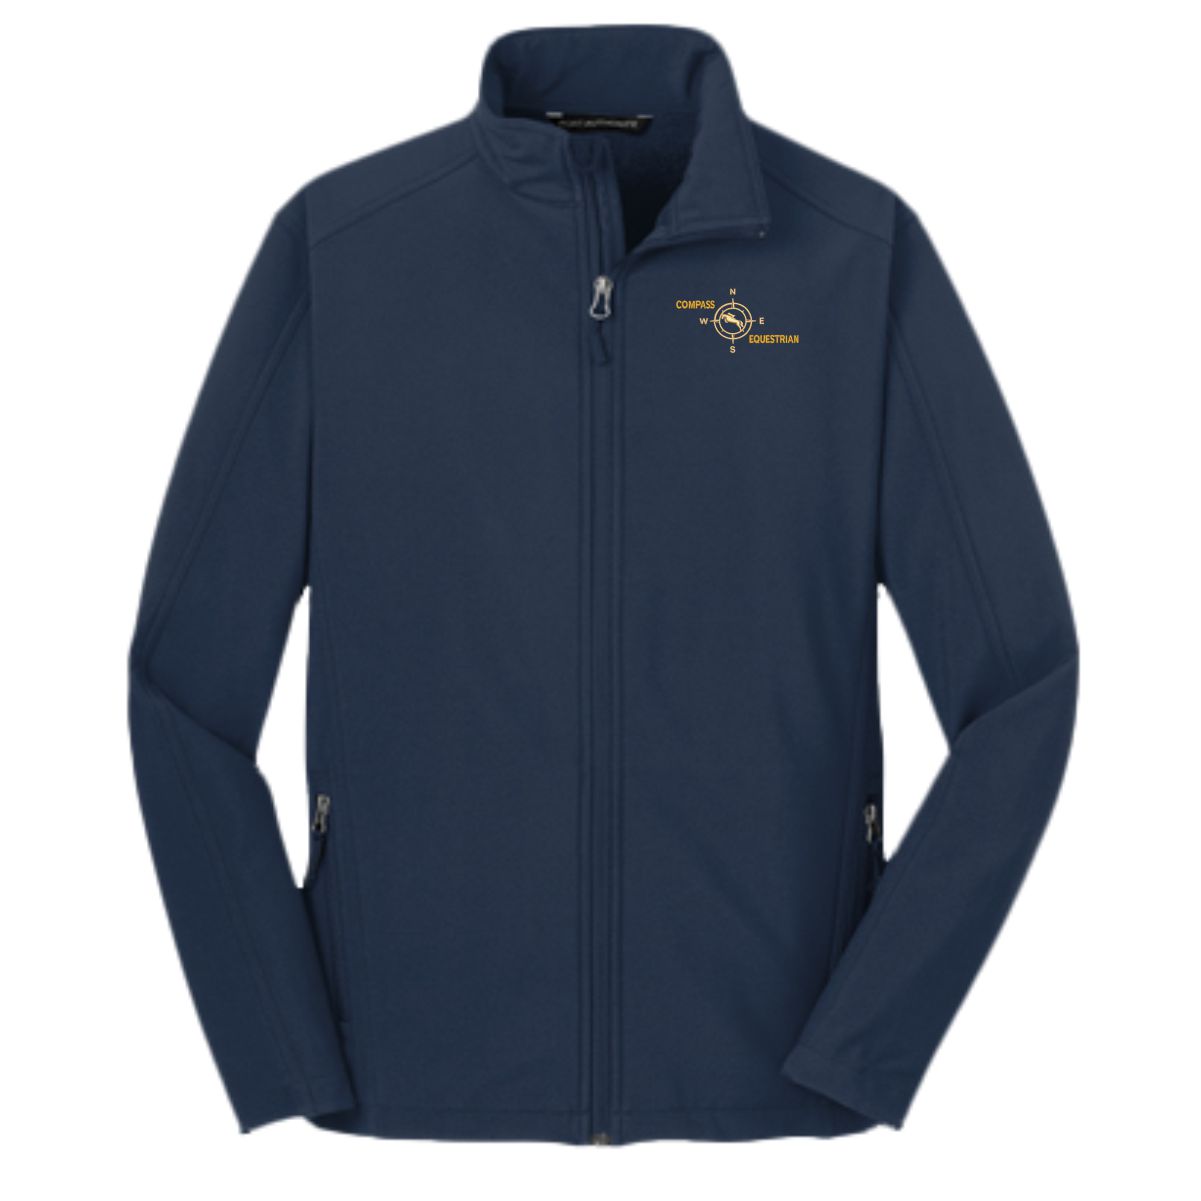 Compass Equestrian Adult & Youth Jacket | HyperStitch, Inc